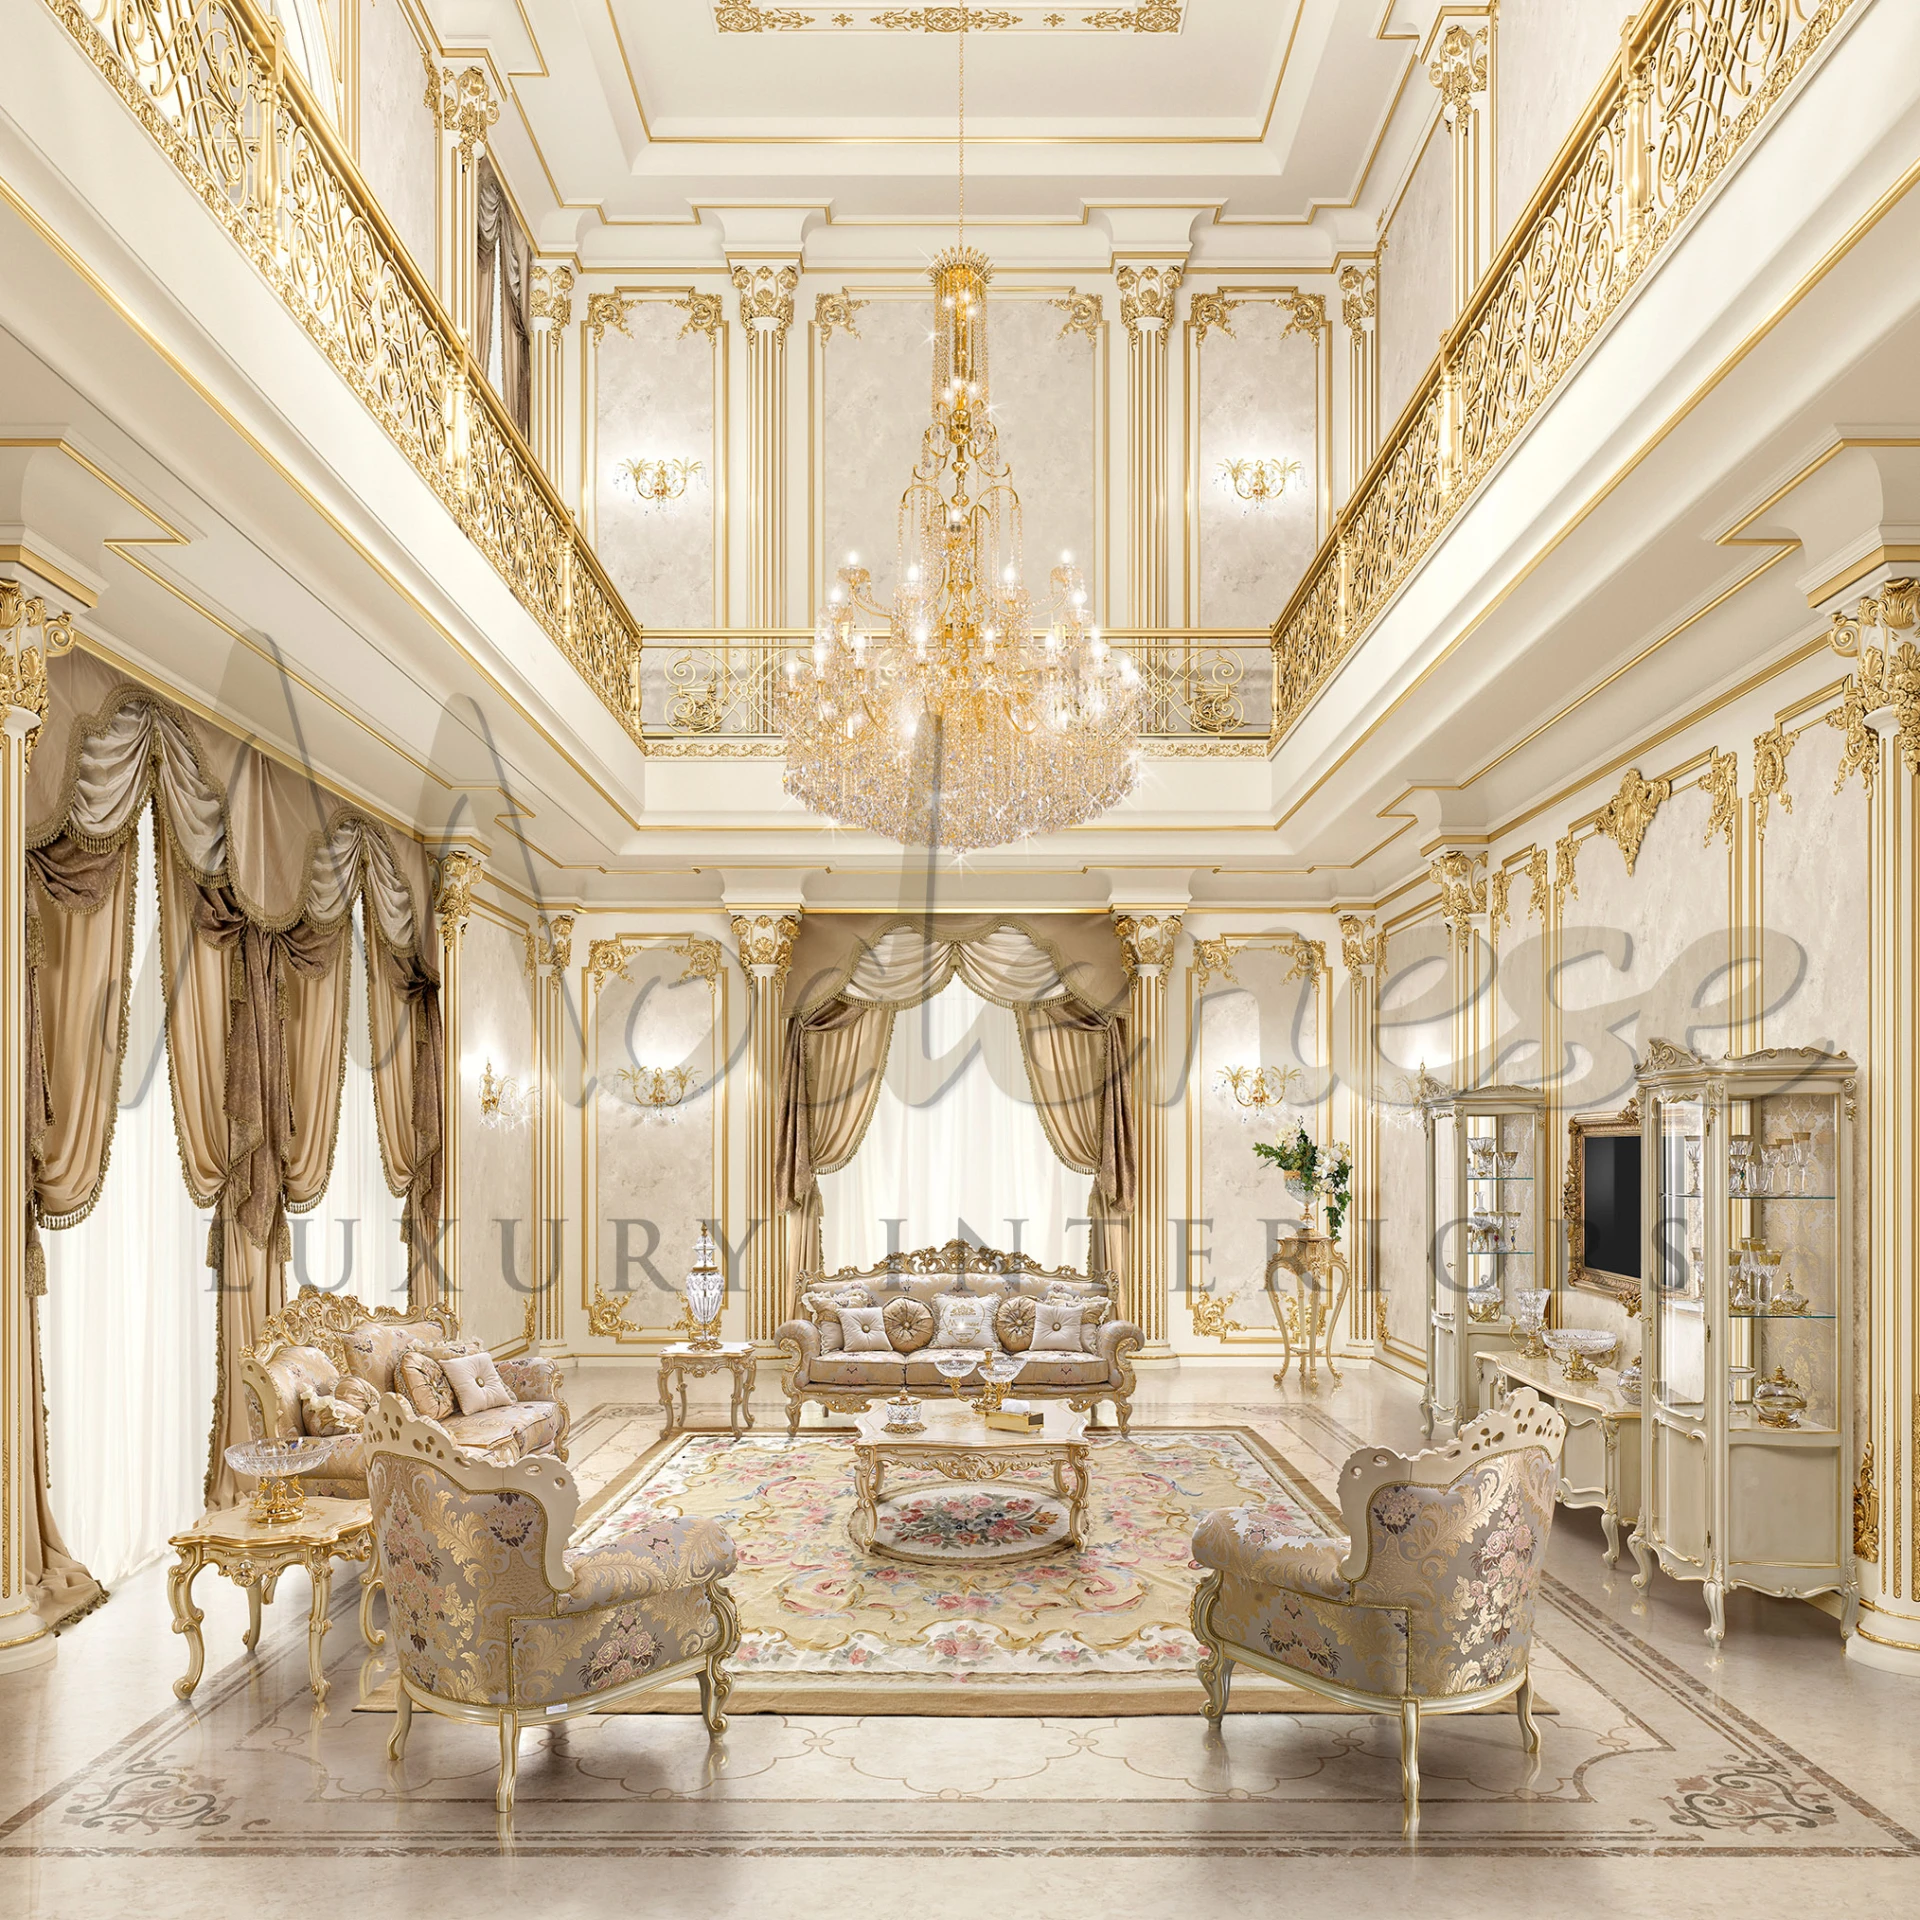 Well executed grand living room with showy gold-trimmed furniture and a luxurious Venetian Splendour Chandelier.